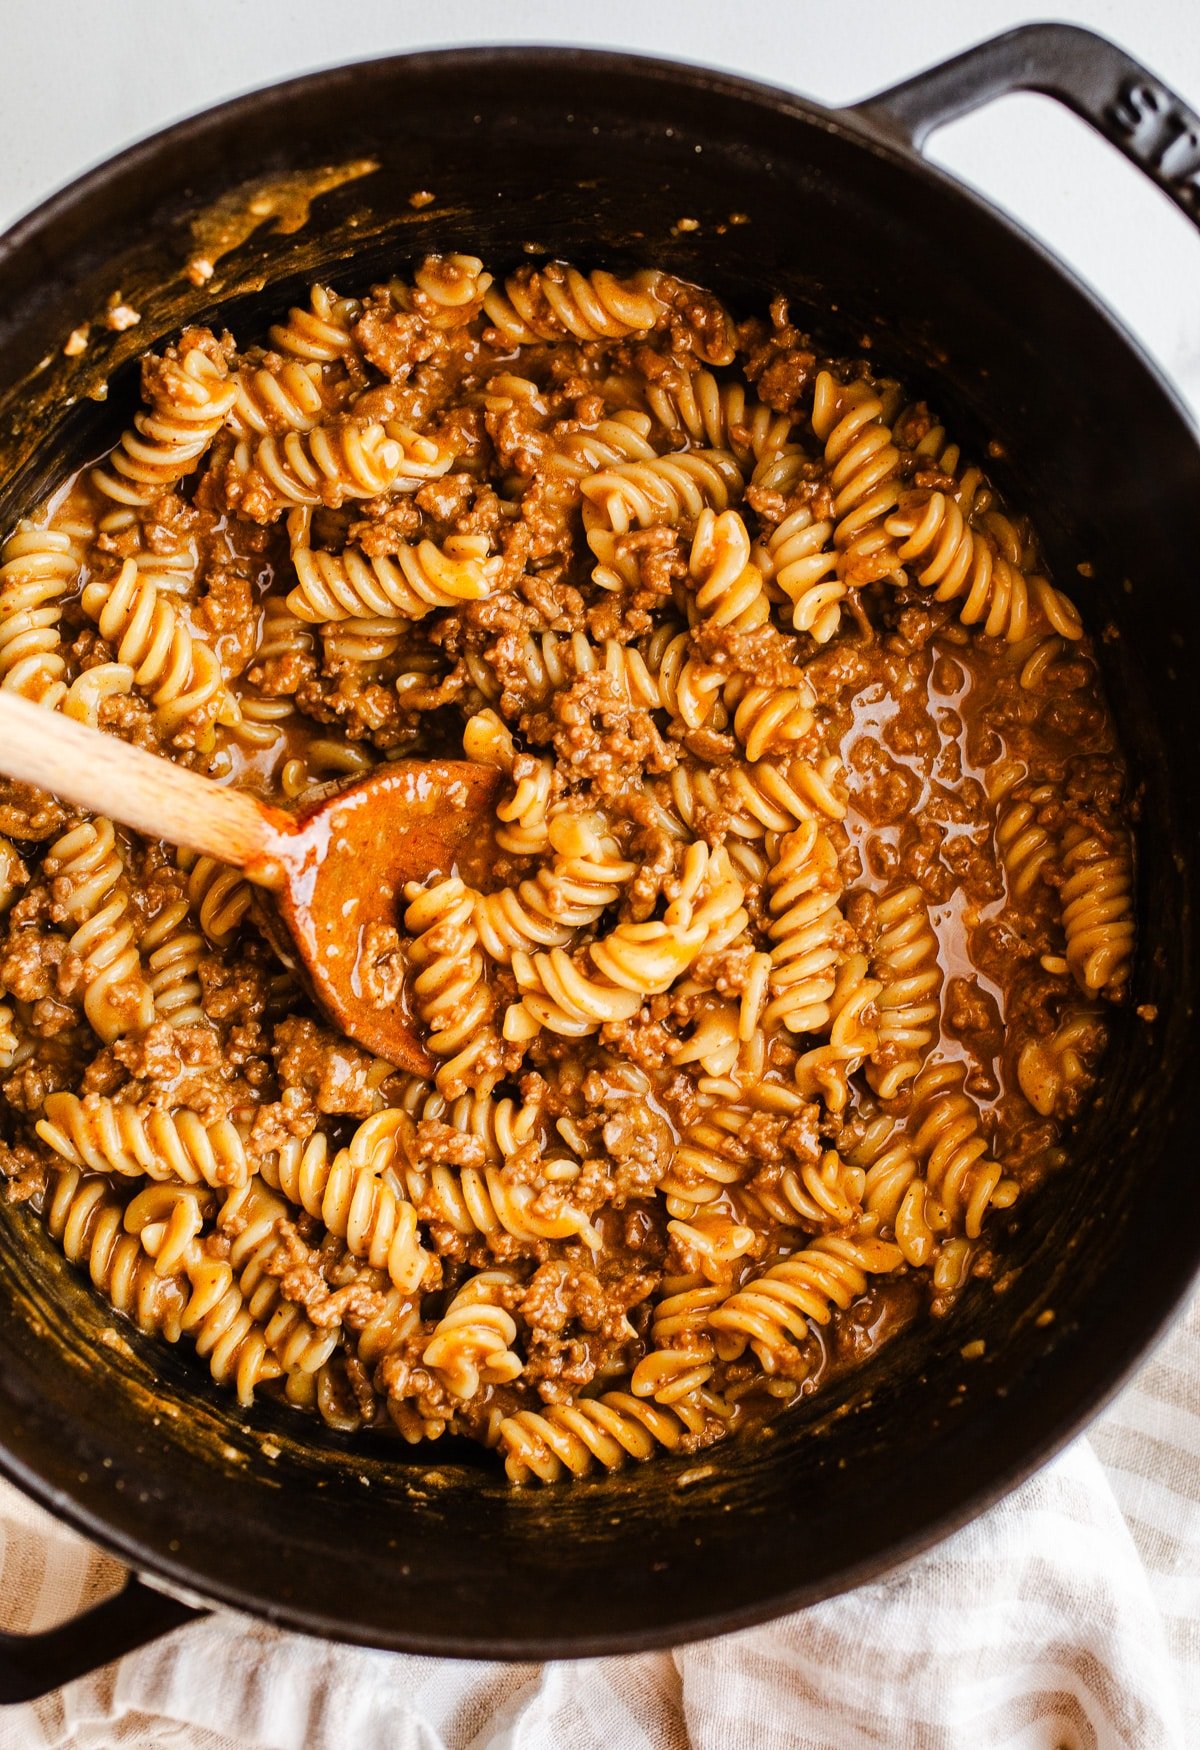 A pot of pasta and ground beef casserole.